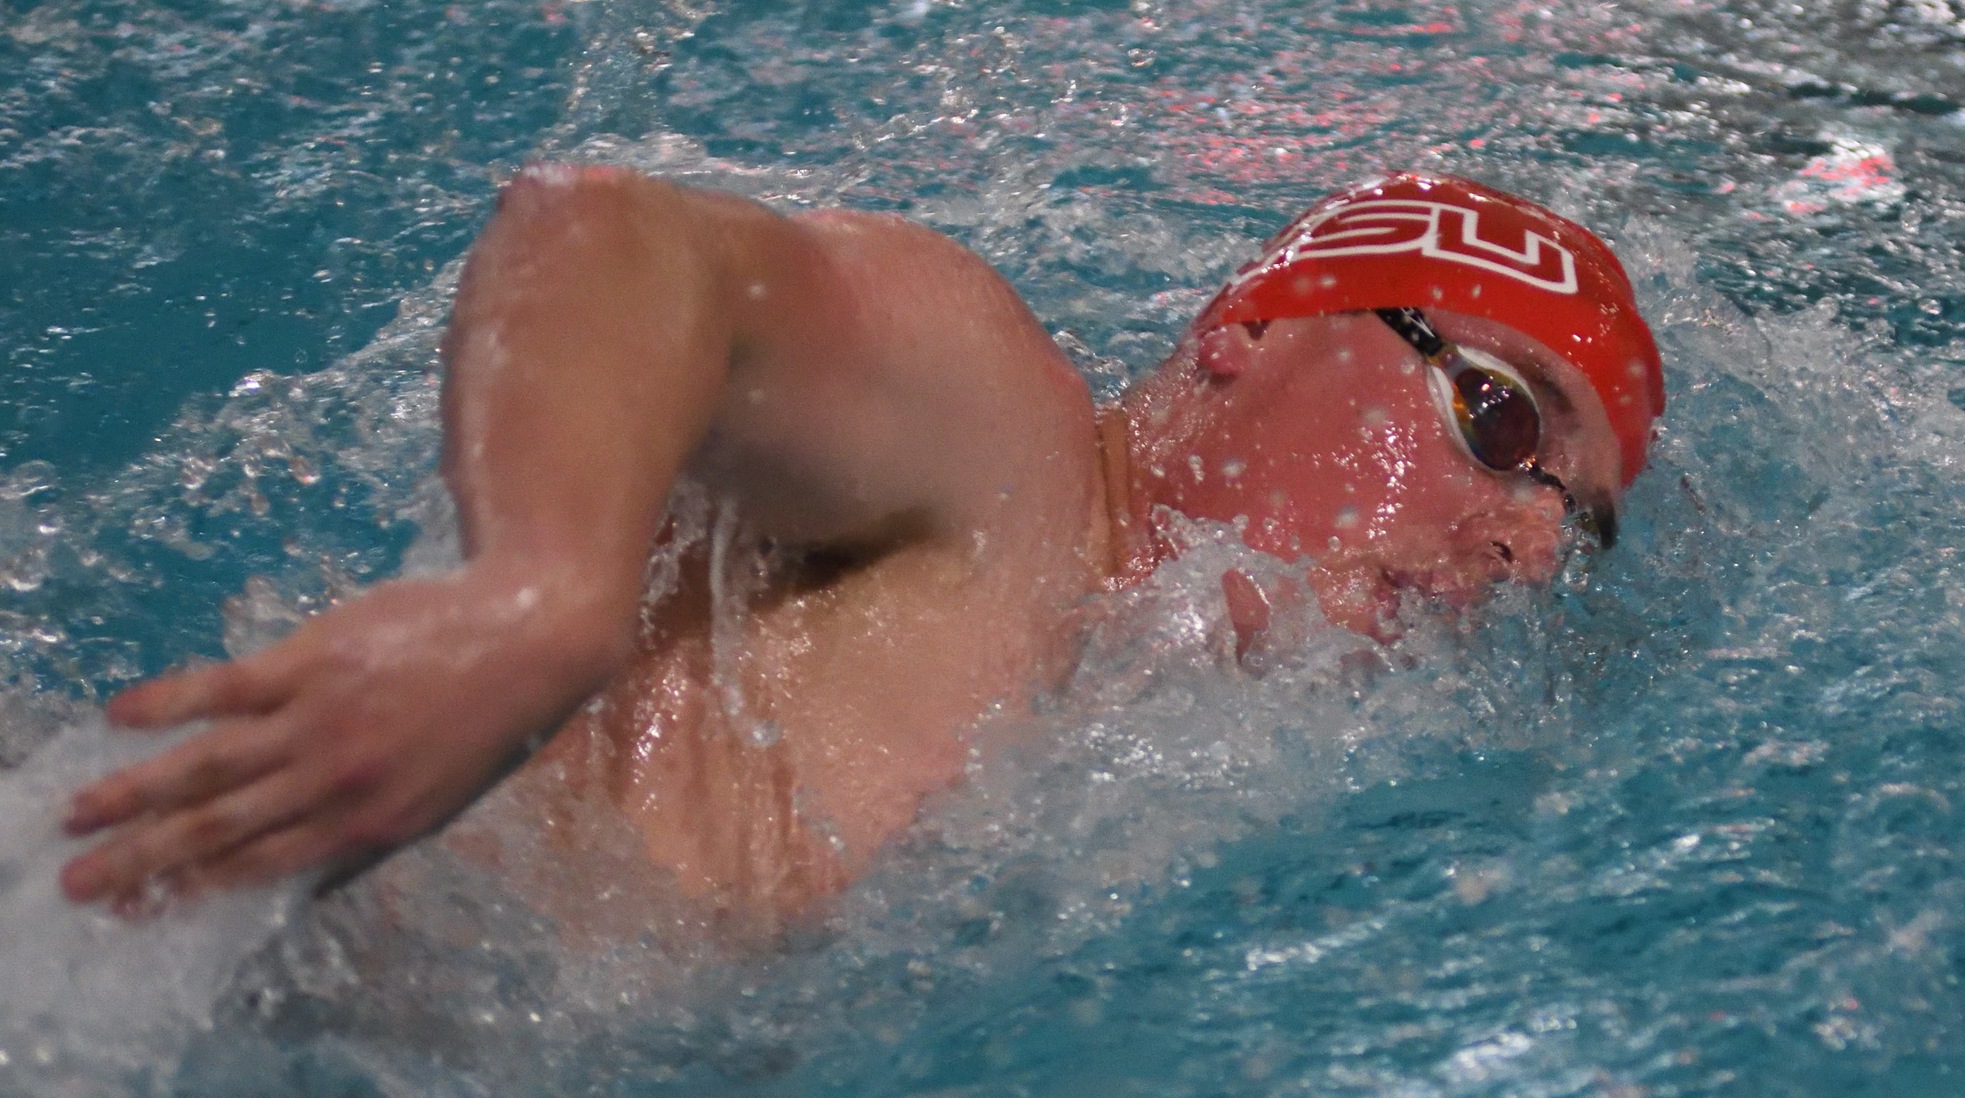 Swimming & Diving teams compete on day two at Wabash Invitational